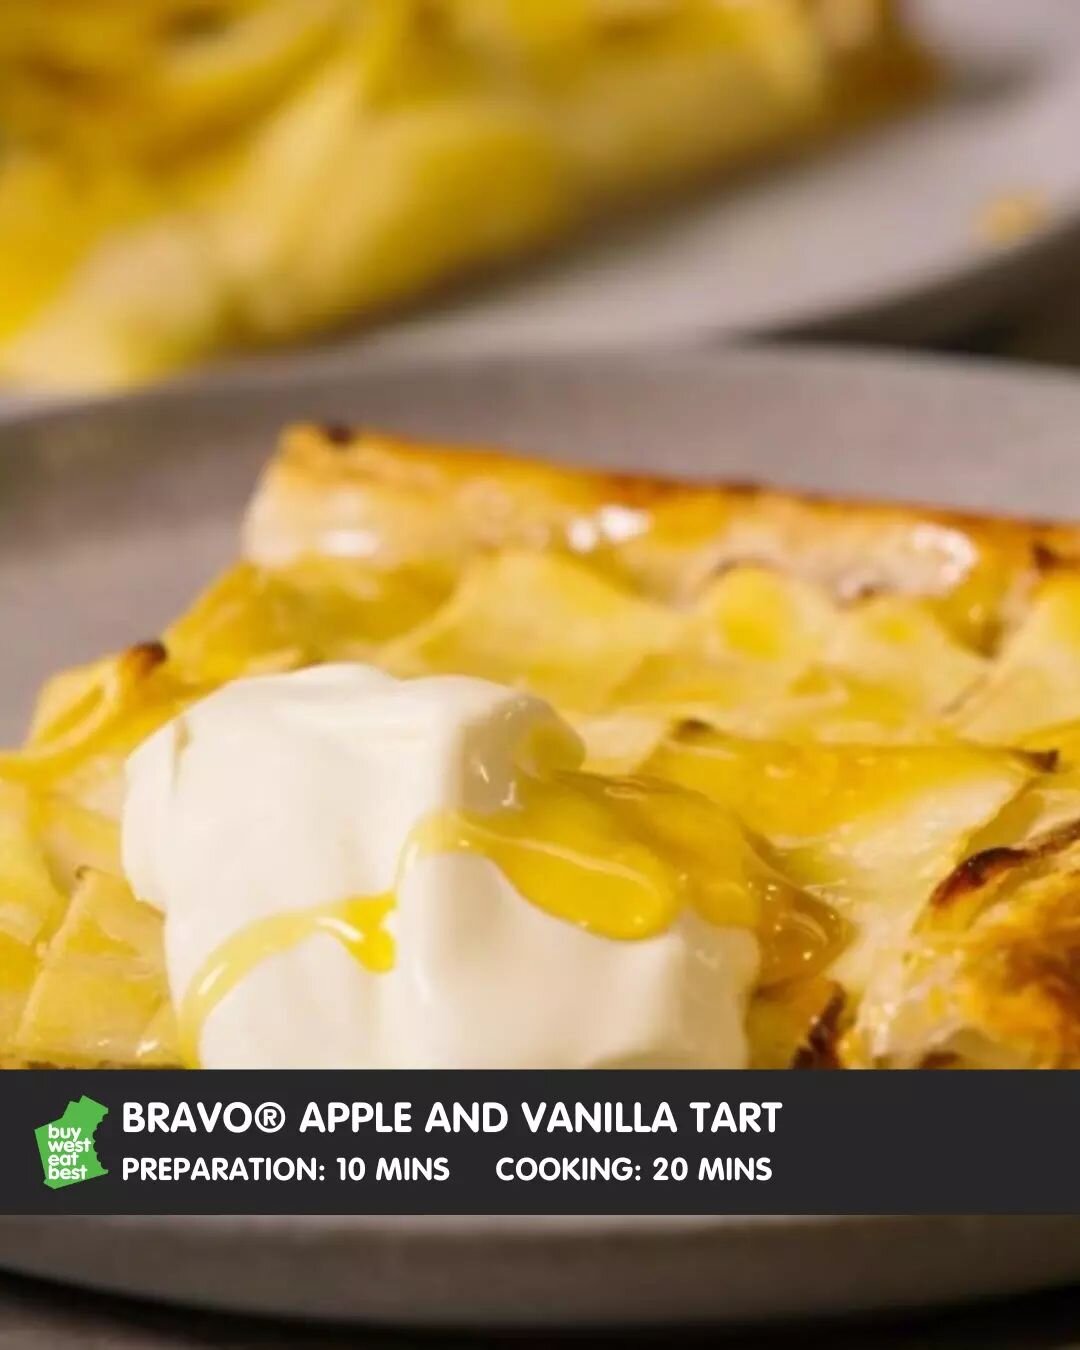 New-season apples are a delight at this time of year! How about creating something special and delicious for the Mum in your life such as this Apple and Vanilla Tart? 

Grab some @empire_pastry, fresh @bravoapples&nbsp;along with a few other simple i